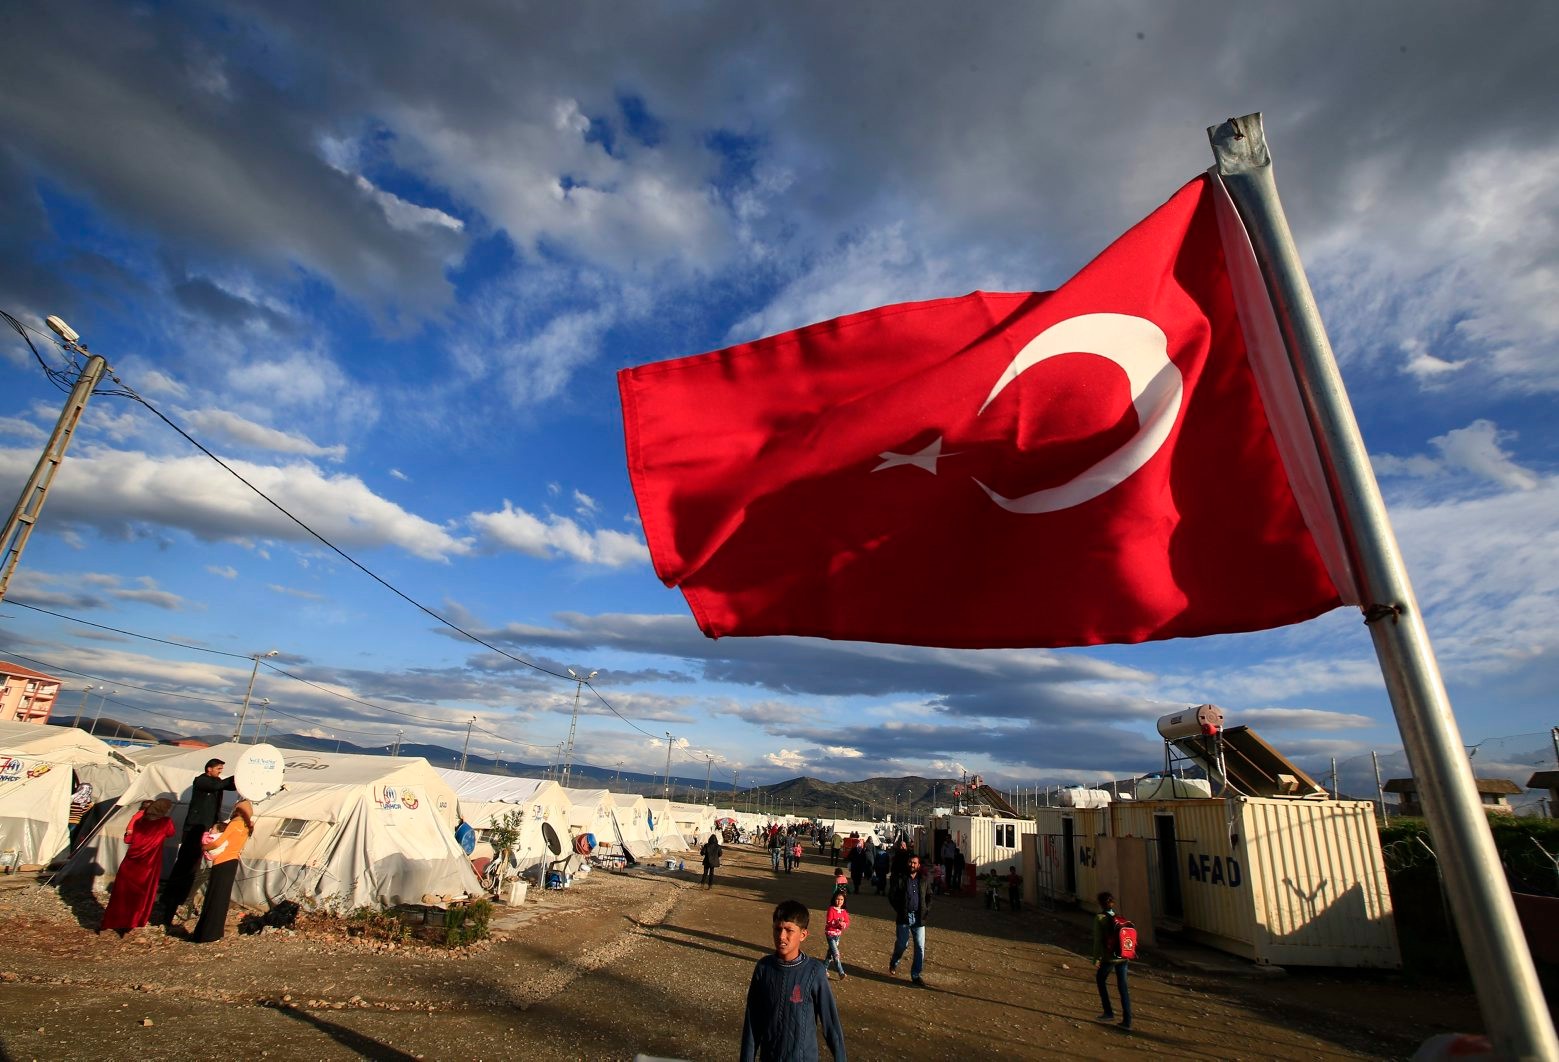 FILE - In this Wednesday, March 16, 2016 file photo a Turkish flag flies at the refugee camp for Syrian refugees in Islahiye, Gaziantep province, southeastern Turkey.  German Chancellor Angela Merkel and top European Union officials plan to travel close to Turkeyís border with Syria in hopes of promoting a troubled month-old agreement to manage a refugee crisis that has left hundreds of thousands stranded on the migrant trail to Europe. (AP Photo/Lefteris Pitarakis, File) Europe Migrants Turkey